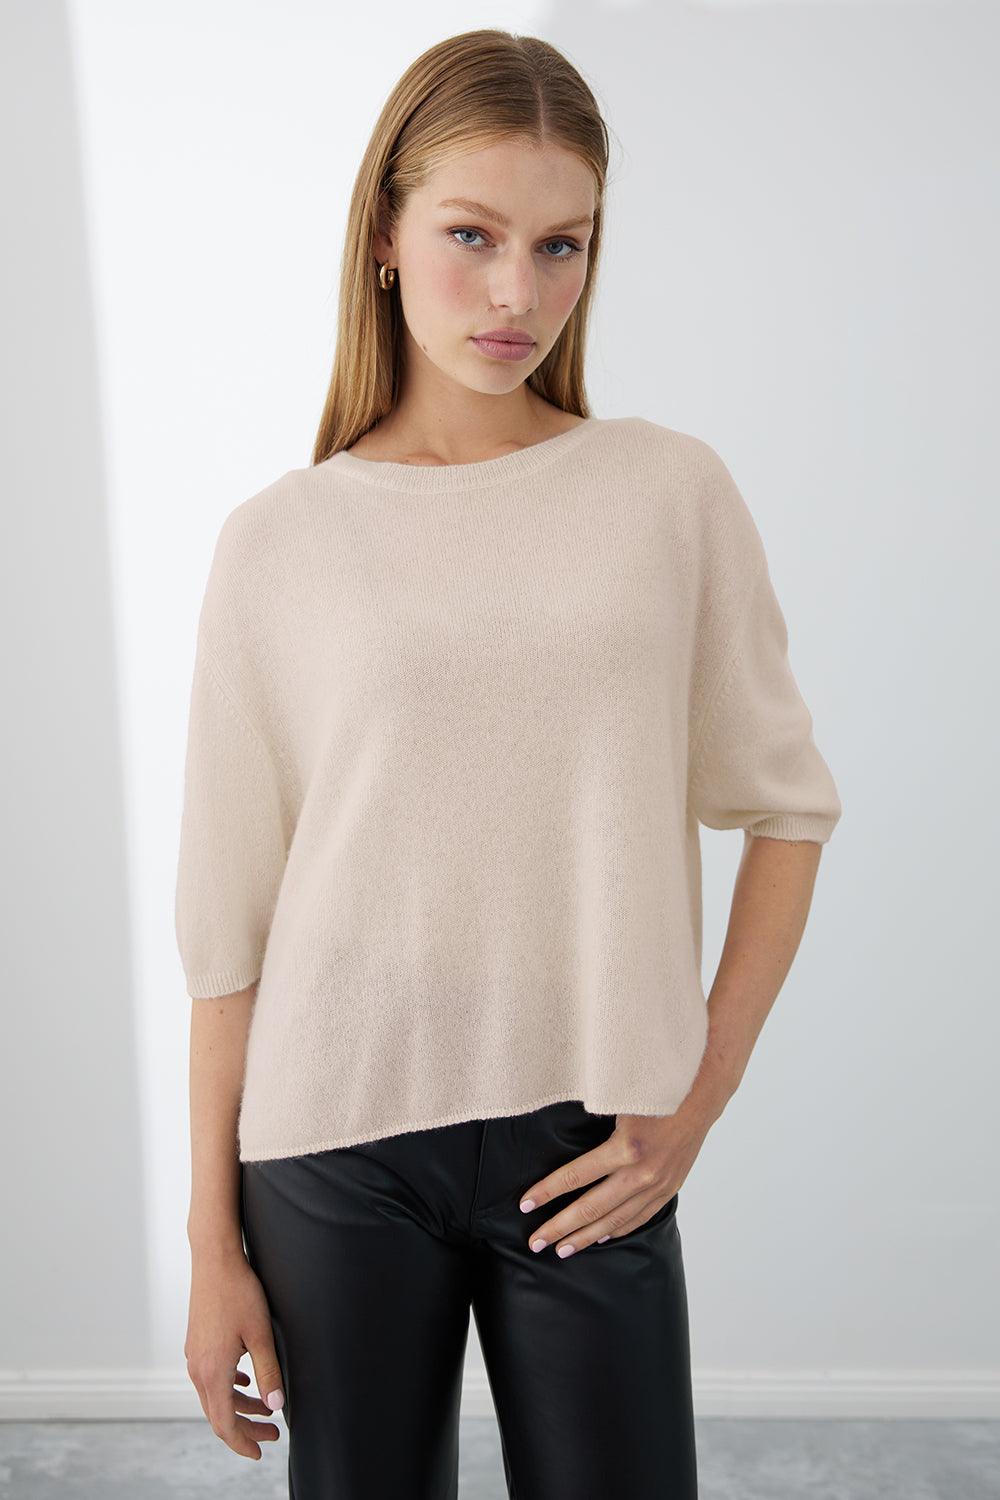 What is Cashmere and Where Does it Come From? – Mia Fratino